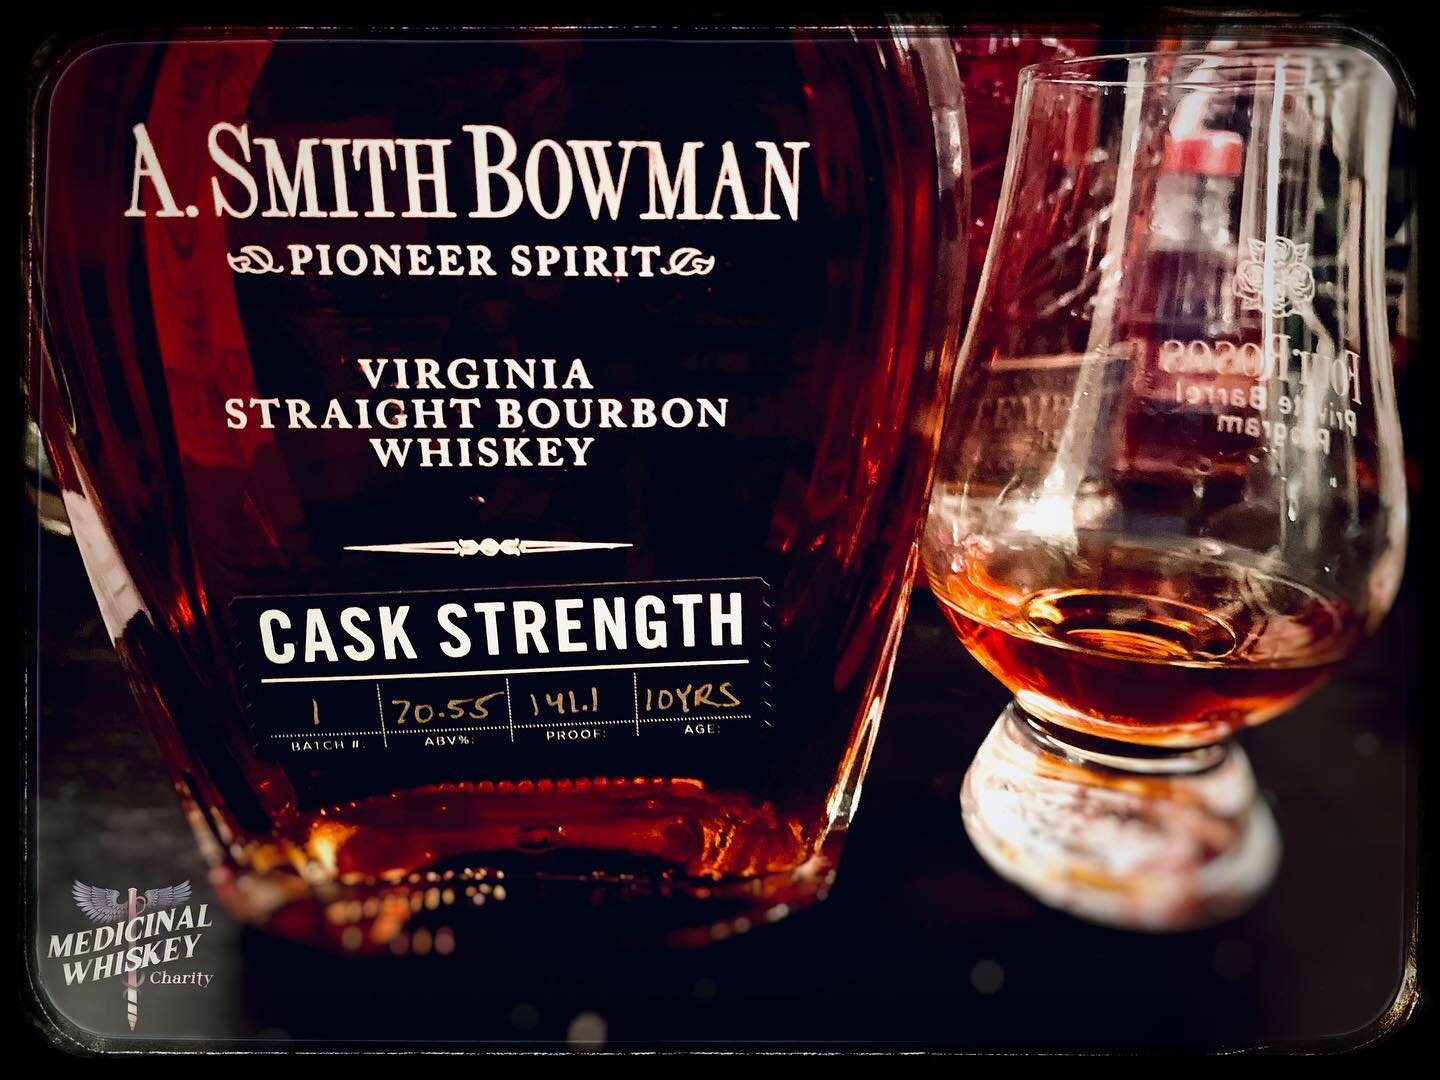 A reminder that whiskey is about memories. 

This one brings back a flood of them from Fredericksburg drinking our first bowman barrel straight from the cask.  The warmth of your first sip of stagg.

Cherry and chocolate to match the structure of our